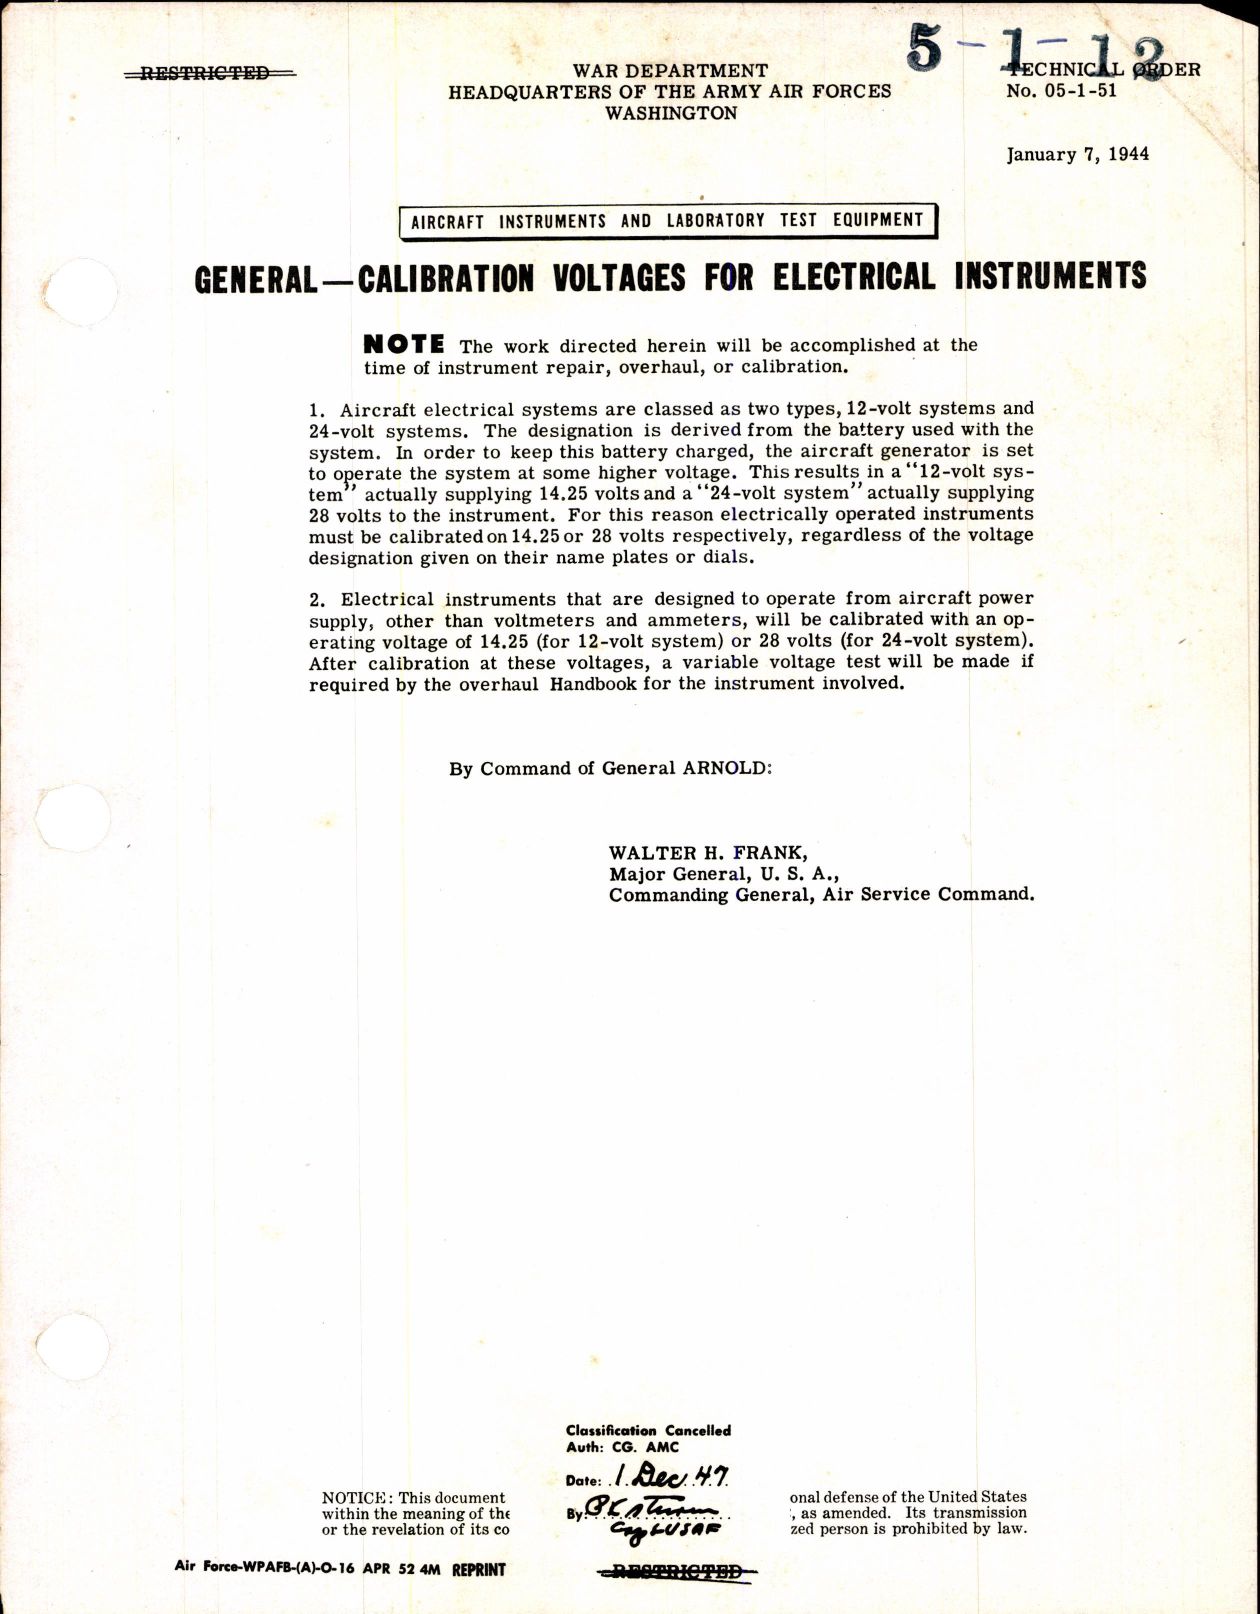 Sample page 1 from AirCorps Library document: Calibration Voltages for Electrical Instruments